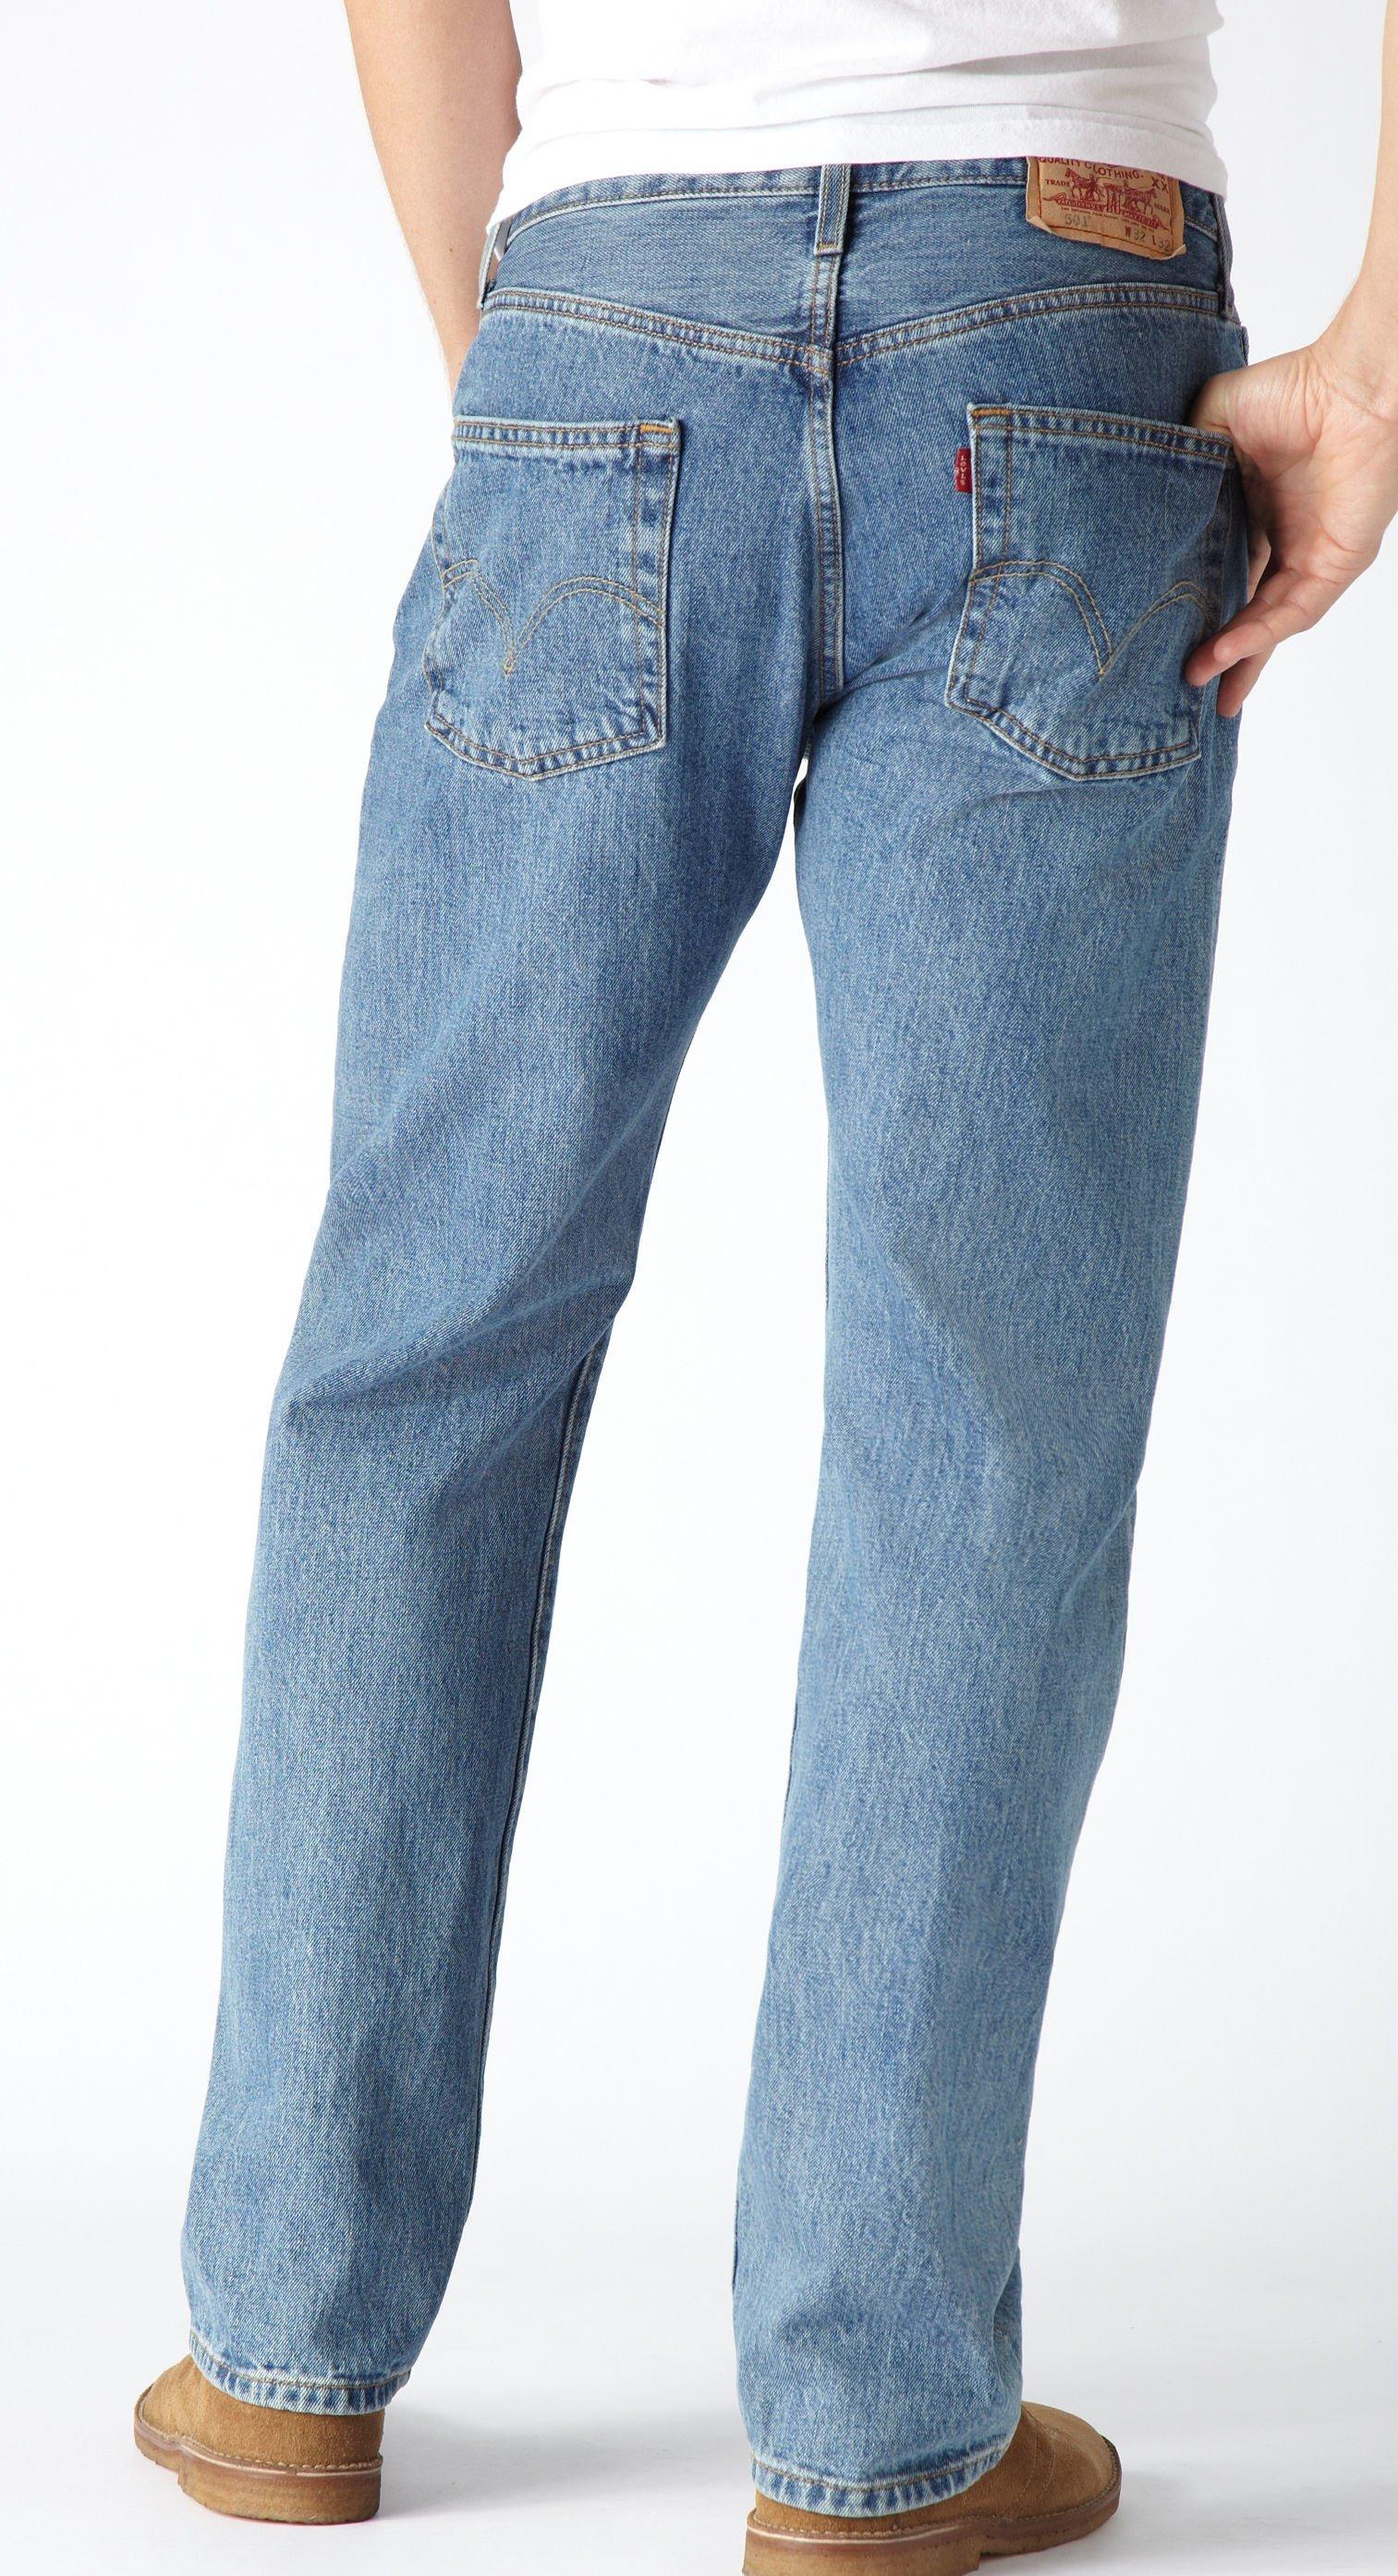 blue jeans levis 501 OFF 60% - Online Shopping Site for Fashion ...